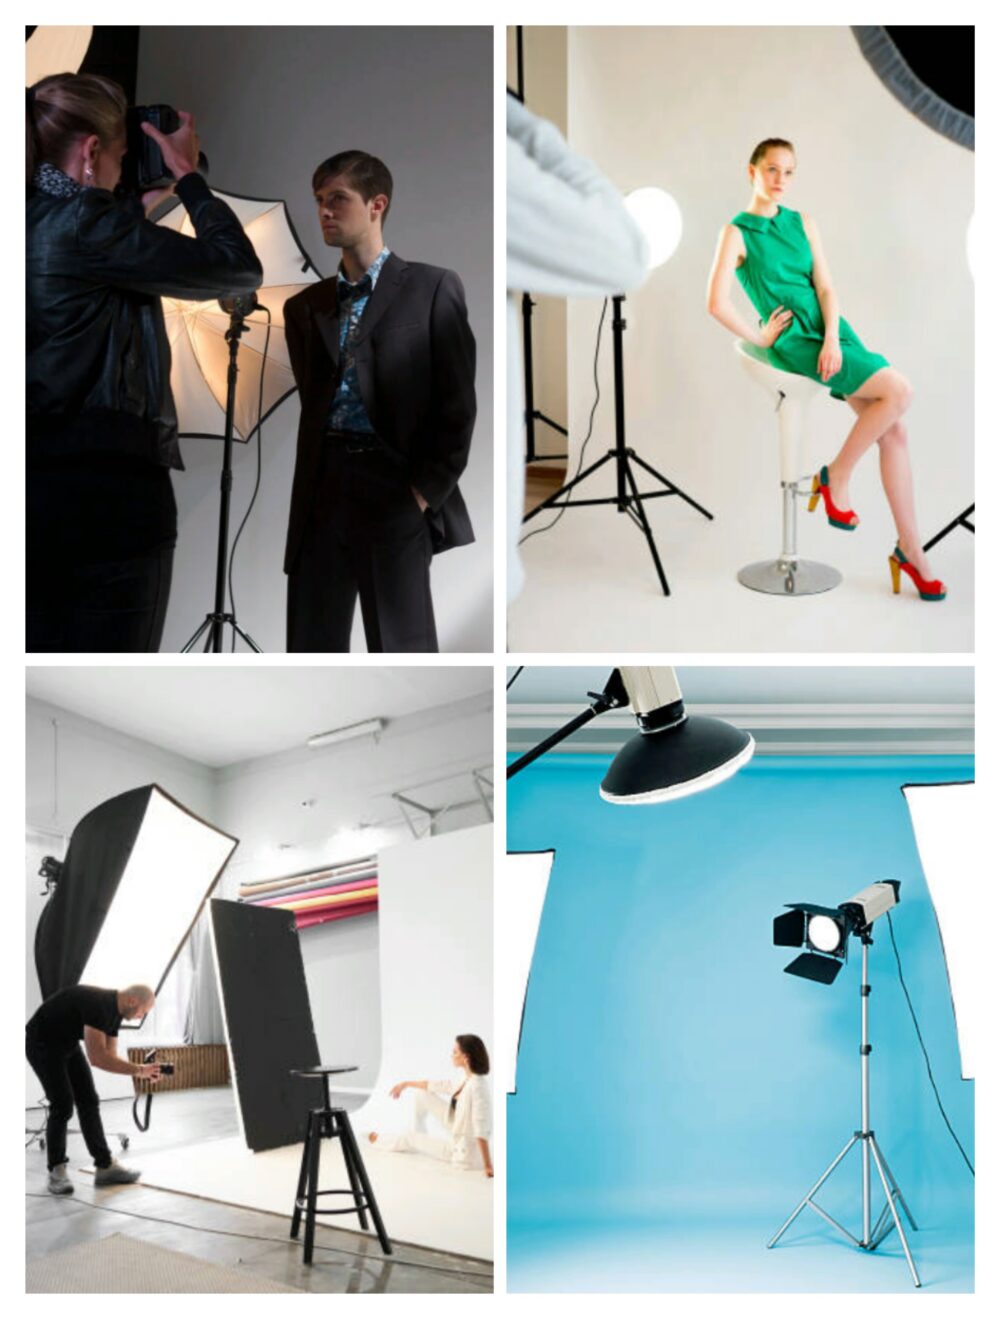 Select Light Sources That Are Good For Fashion Photoshoots